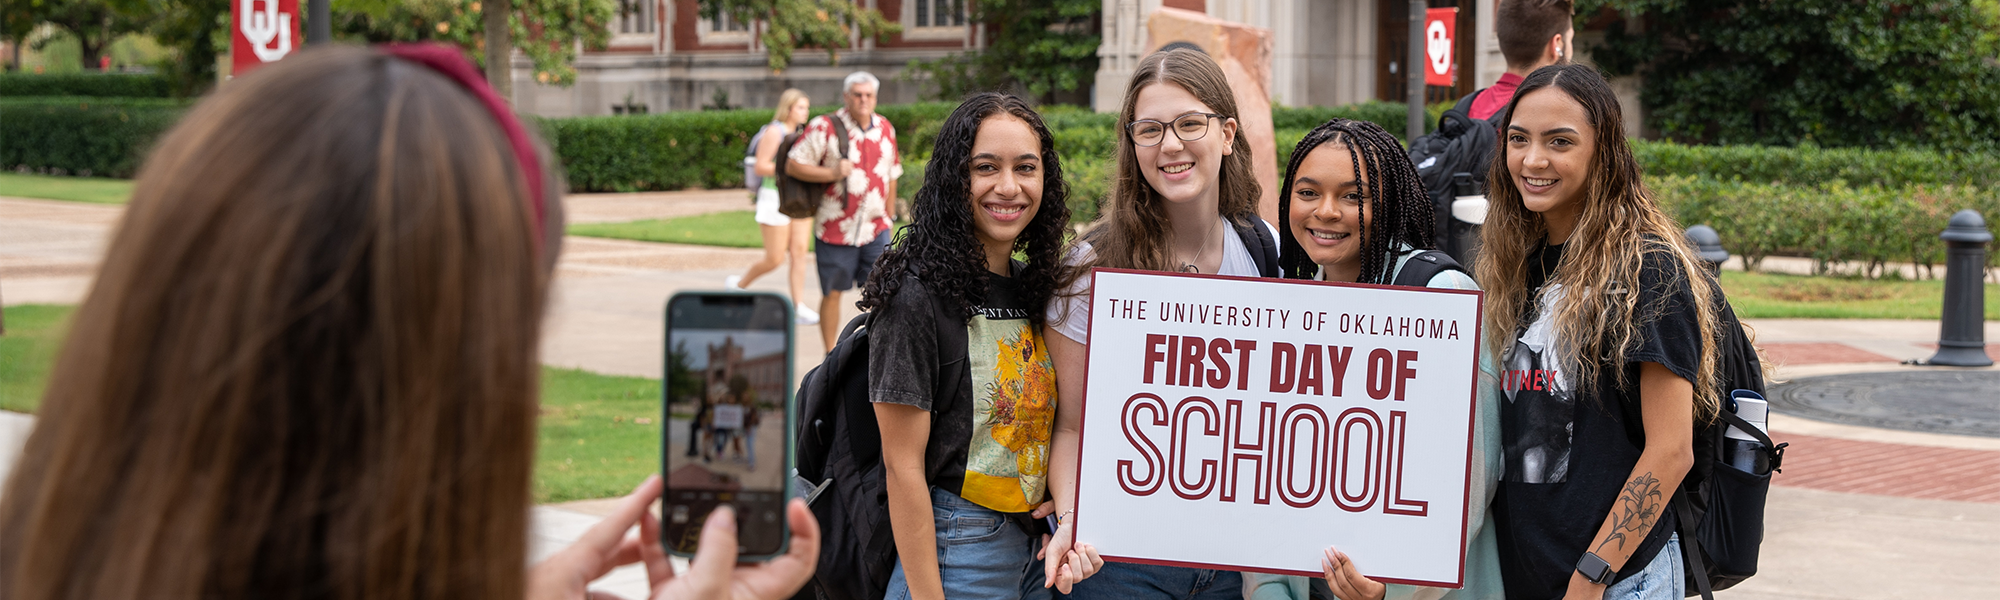 A group of OU students posing for a photo, holding a sign that reads, "The University of Oklahoma First Day of School".